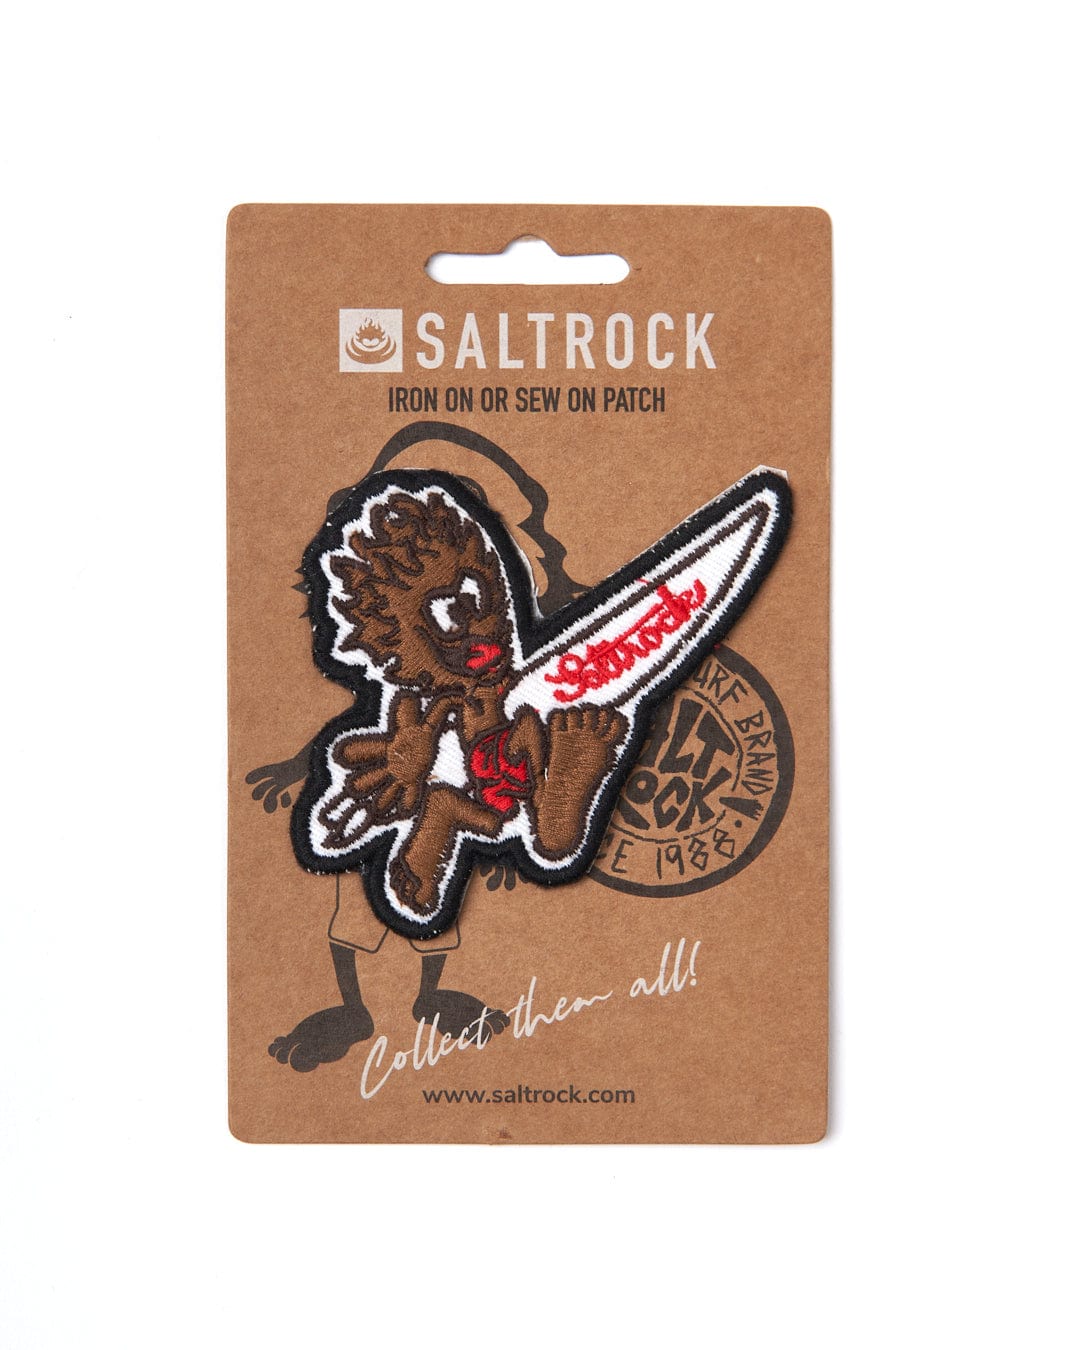 Customise your clothing with this Saltrock Running Man iron on patch, featuring intricate embroidery.